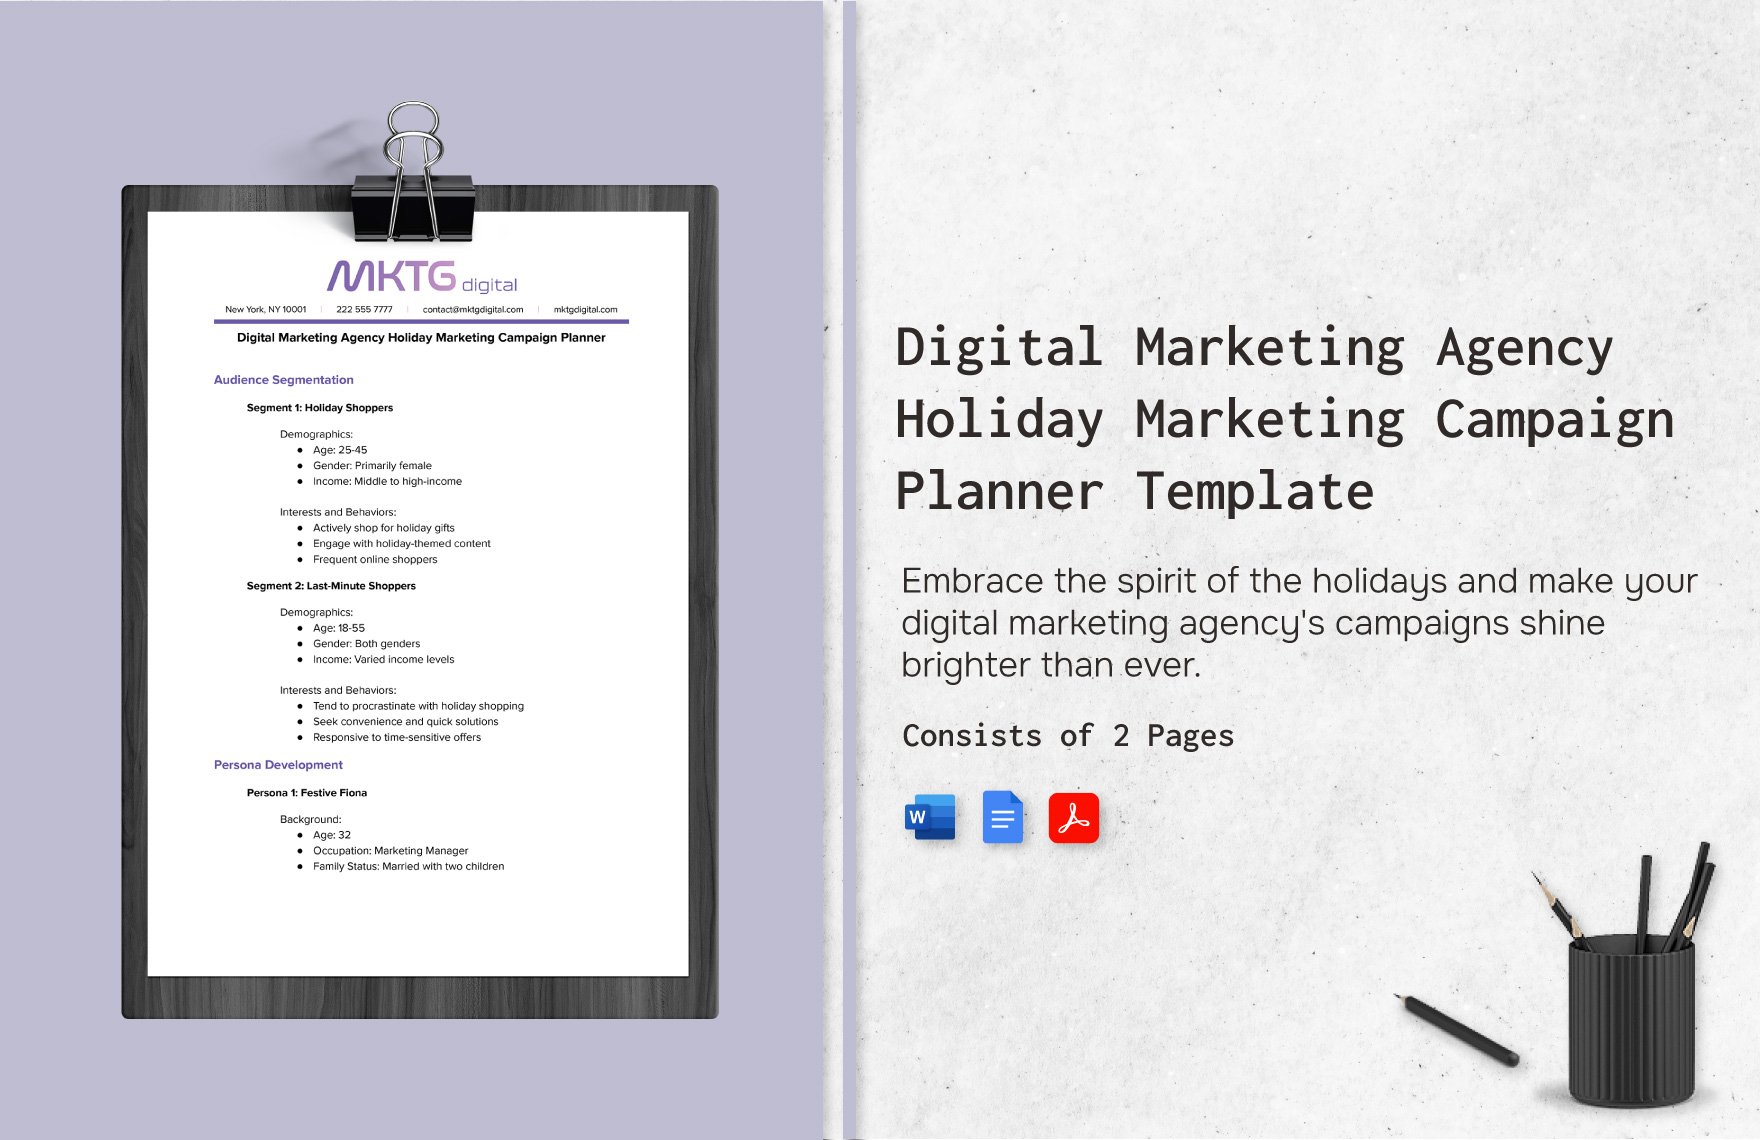 Digital Marketing Agency Holiday Marketing Campaign Planner Template